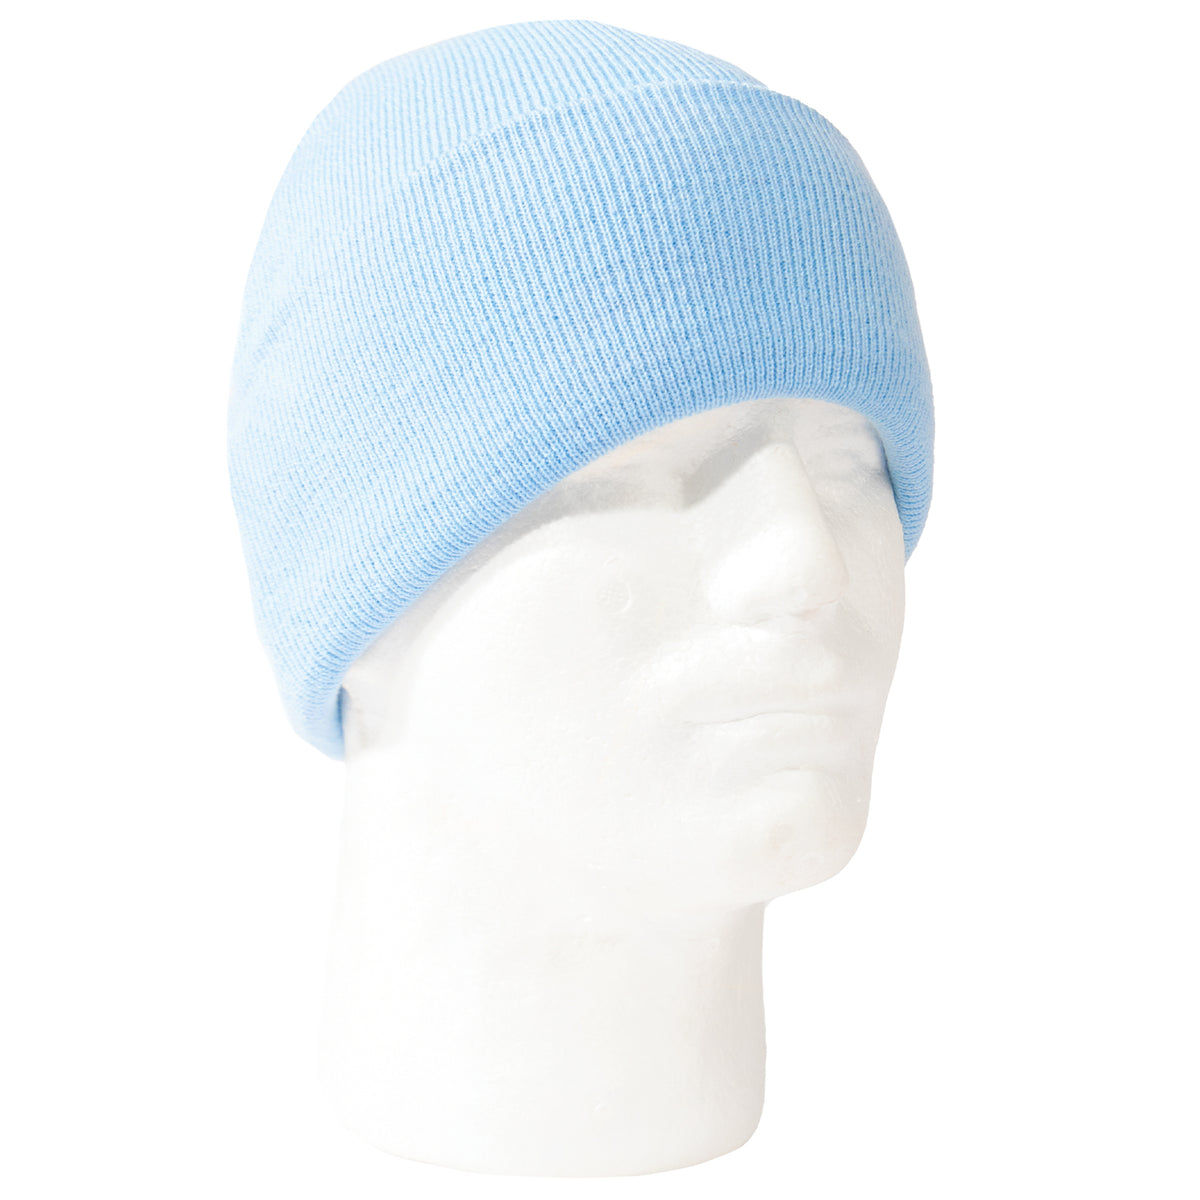 Rothco Deluxe Fine Knit Watch Cap Light Blue